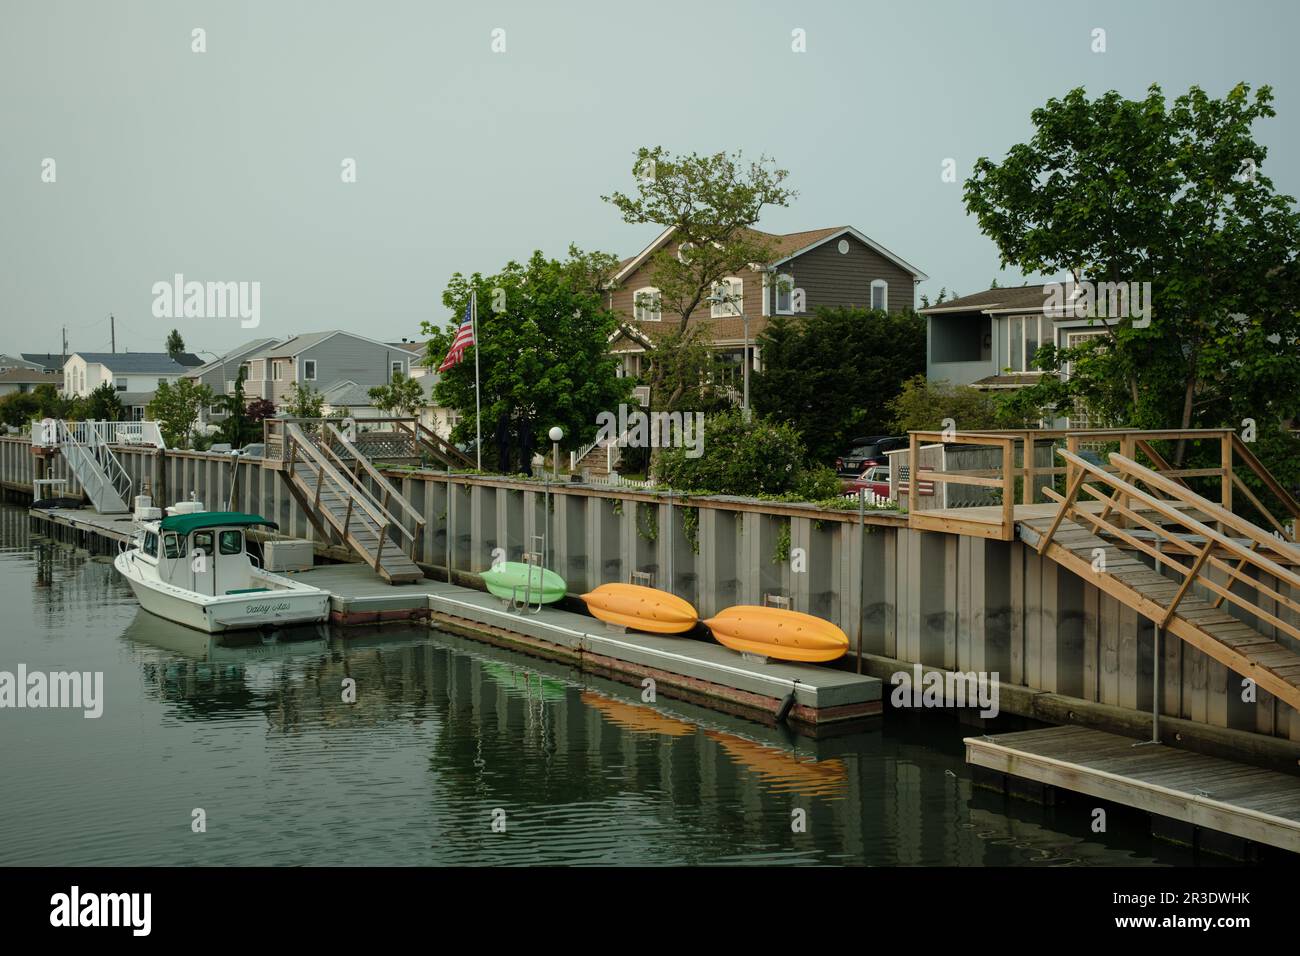 Canal with house and boats in Long Beach, New York Stock Photo